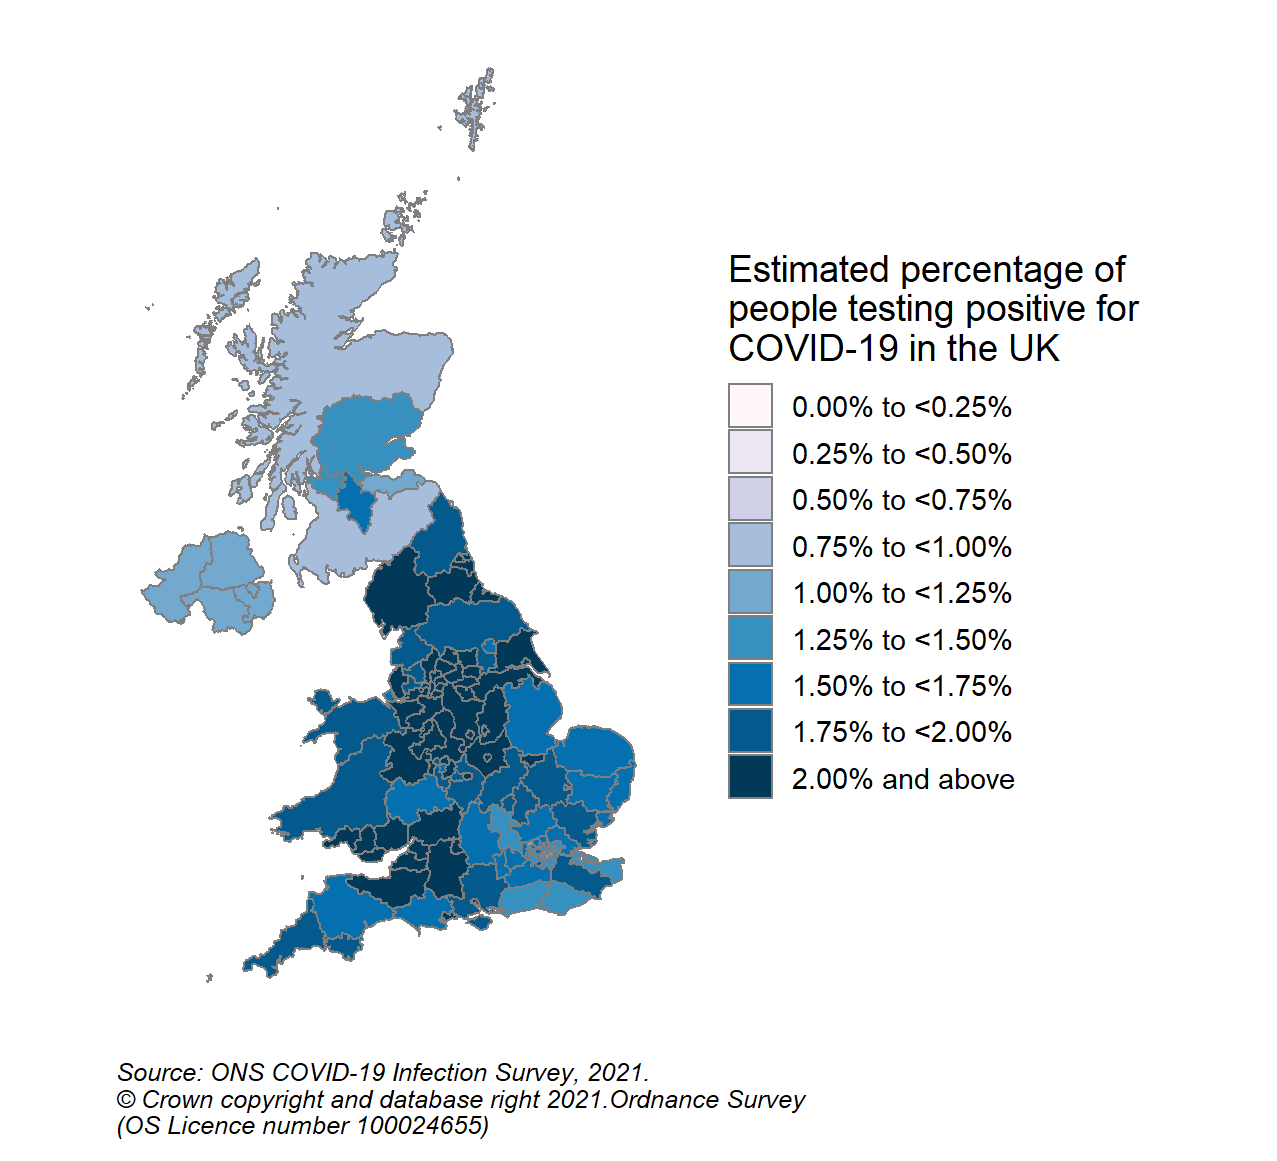 Figure 5: Modelled estimates of the percentage of the private residential population within each CIS sub-region who would have tested positive for COVID-19 in the week 17 to 23 October 2021 in the UK (See notes 3,5,9,10,12,14)  This colour coded map of the UK shows the modelled estimates of the percentage of the private residential population testing positive for COVID-19, by COVID-19 Infection Survey sub-regions. In Scotland, these sub-regions are comprised of Health Boards. The regions are: 123 - NHS Grampian, NHS Highland, NHS Orkney, NHS Shetland and NHS Western Isles, 124 - NHS Fife, NHS Forth Valley and NHS Tayside, 125 - NHS Greater Glasgow & Clyde, 126 - NHS Lothian, 127 - NHS Lanarkshire, 128 - NHS Ayrshire & Arran, NHS Borders and NHS Dumfries & Galloway.  The sub-regions with the highest modelled estimate for the percentage of people testing positive were CIS Region 127 (NHS Lanarkshire) at 1.60% (95% credible interval: 1.23% to 2.04%) and CIS region 125 (NHS Greater Glasgow and Clyde) at 1.43% (95% credible interval: 1.12% to 1.80%).  The region with the lowest modelled estimate was Region 128 (NHS Ayrshire & Arran, NHS Borders and NHS Dumfries & Galloway), at 0.91% (95% credible interval: 0.67% to 1.23%).